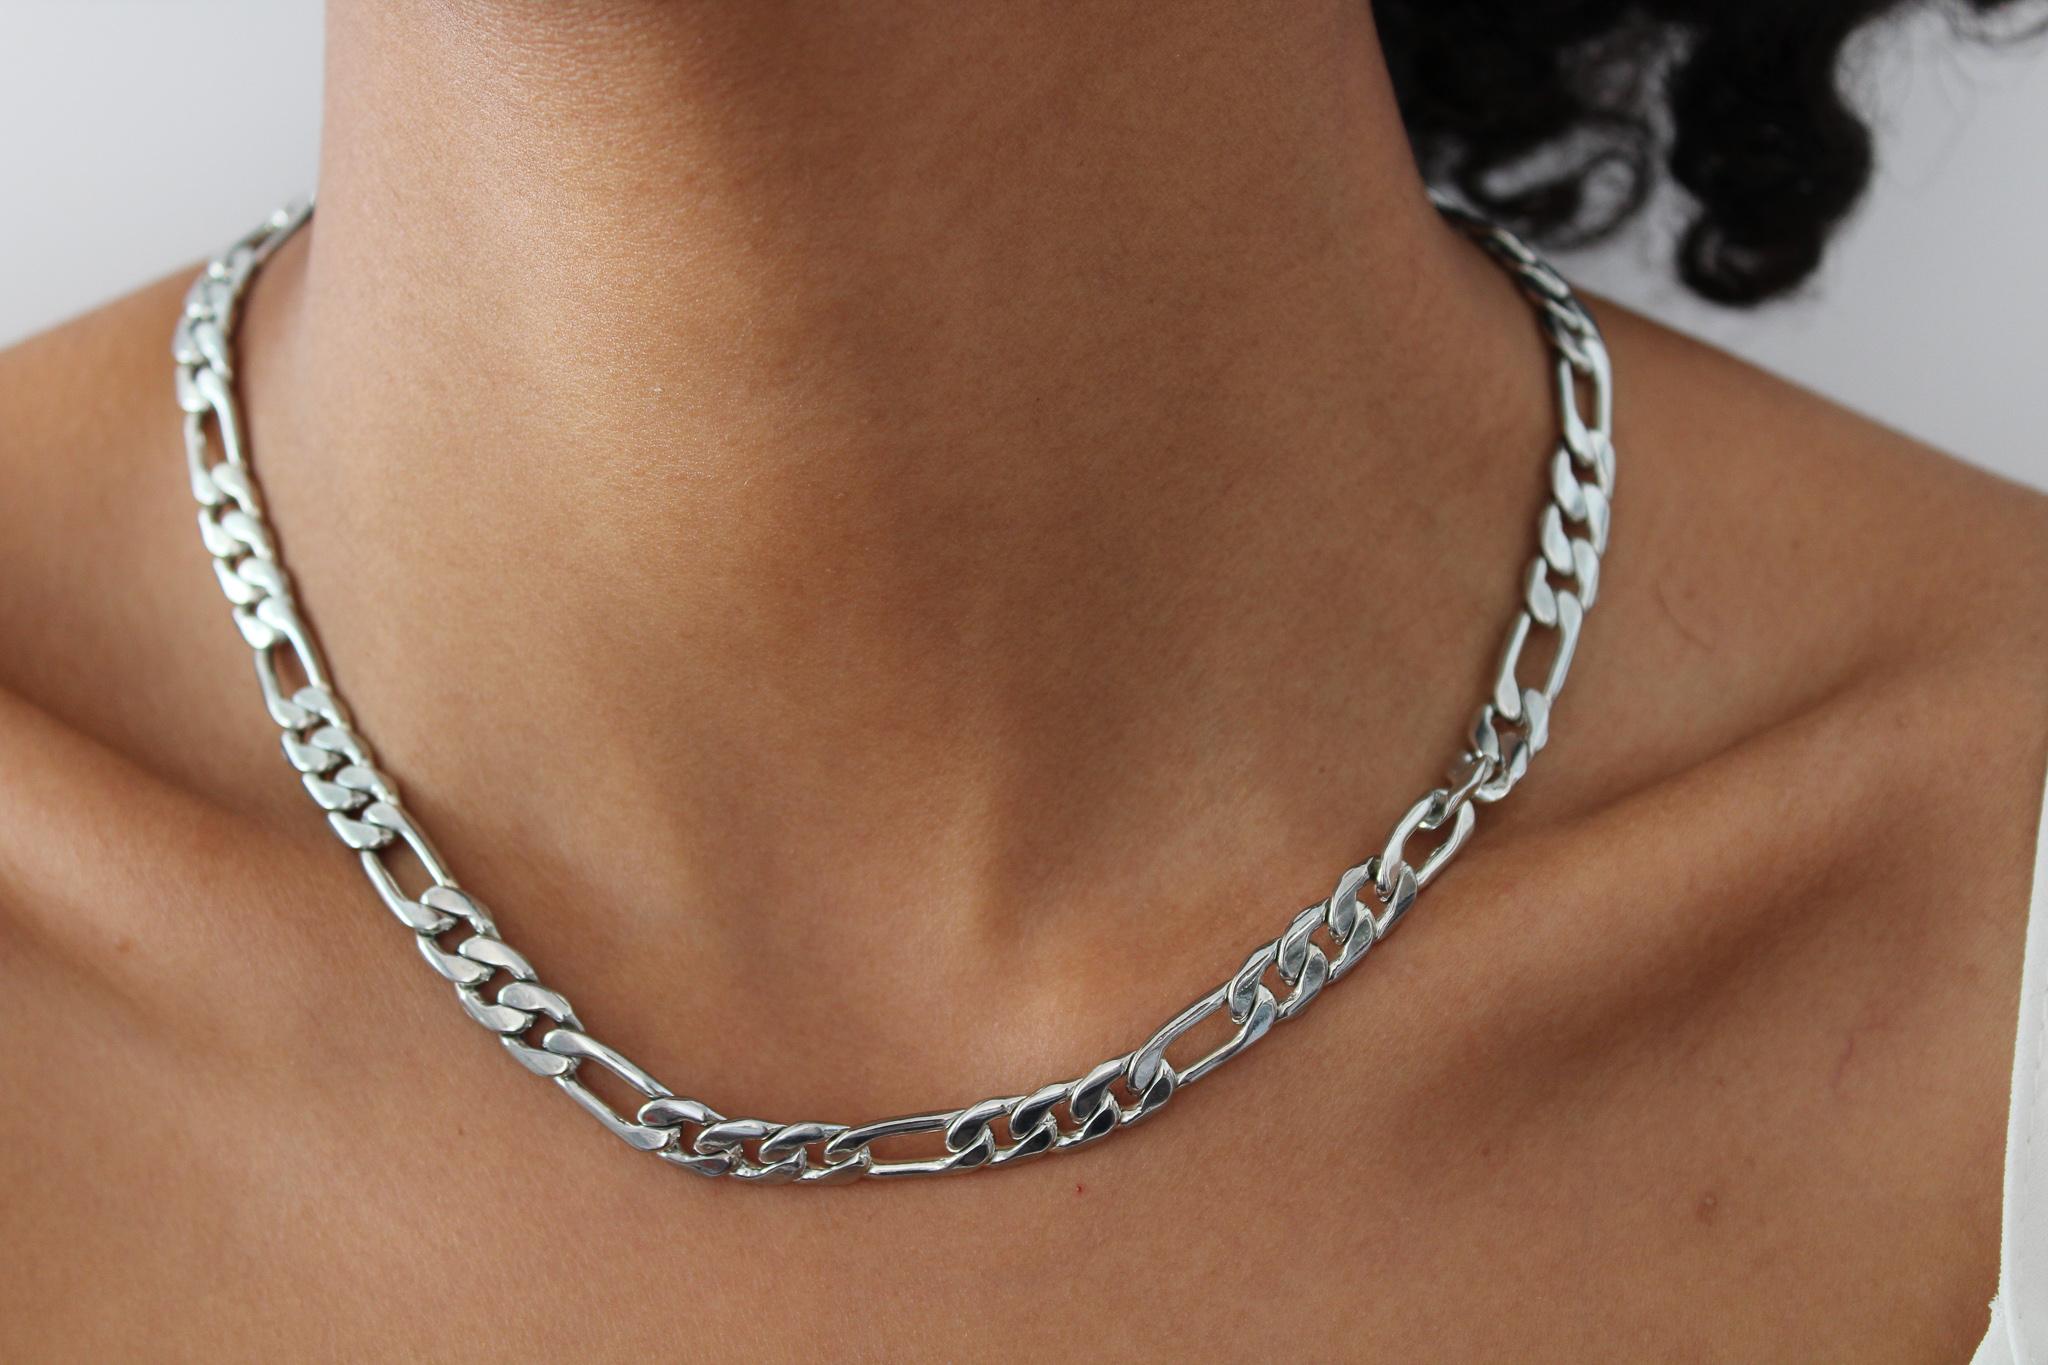 Vintage Grosse Necklace 1980s

Timelessly cool and versatile silver plated chain from one of the world's most famous costume jewellers. Made in Germany in the 1980s.

Size & Fit
-Length - 16 inches / 14cm
-Width - 0.2 inches
-Lobster